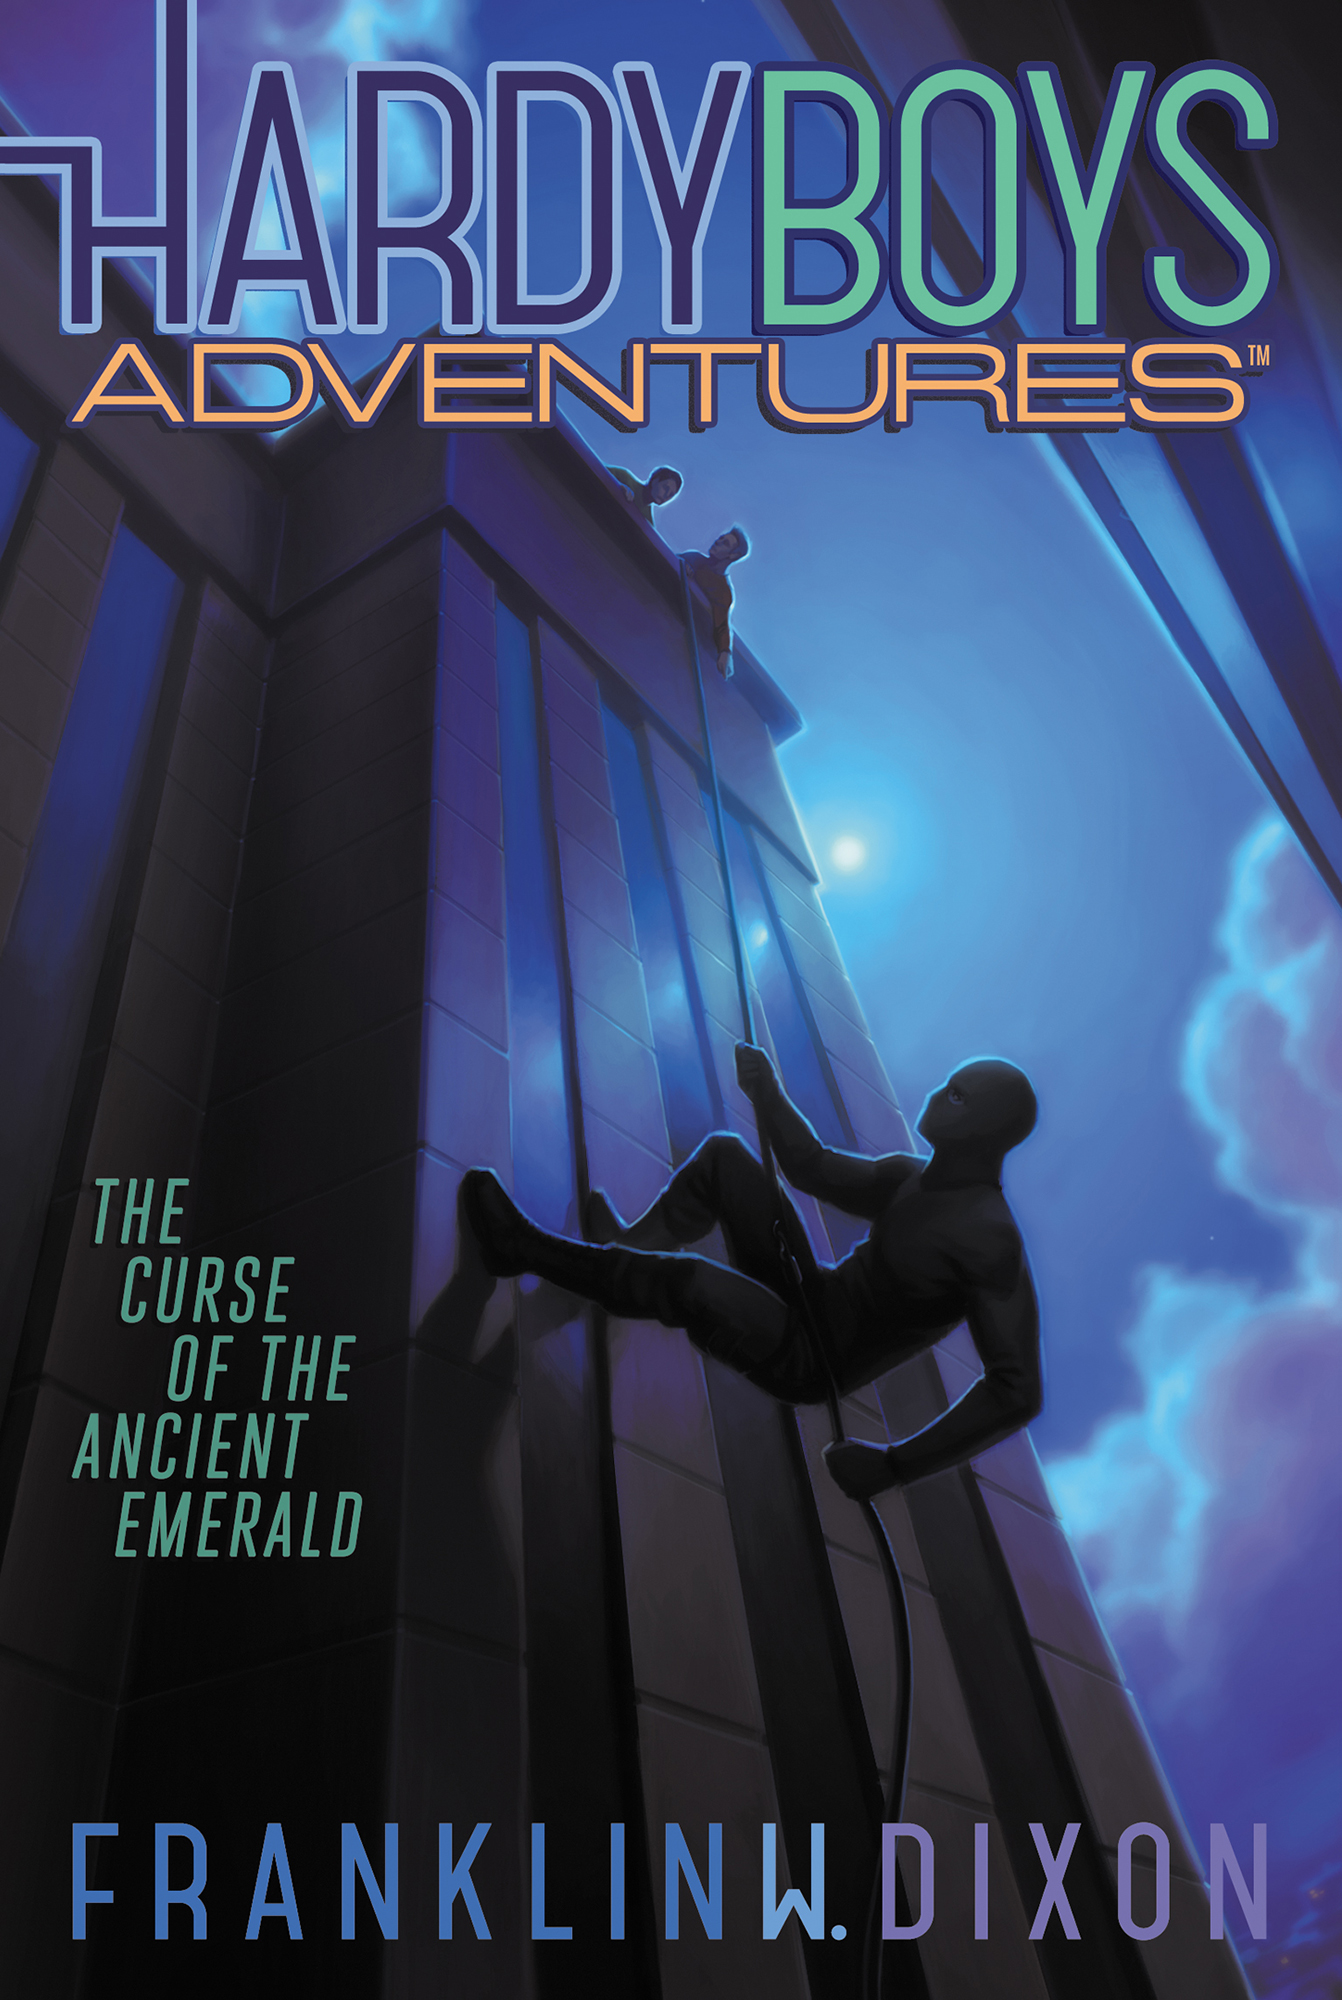 The Curse of the Ancient Emerald by Franklin W. Dixon